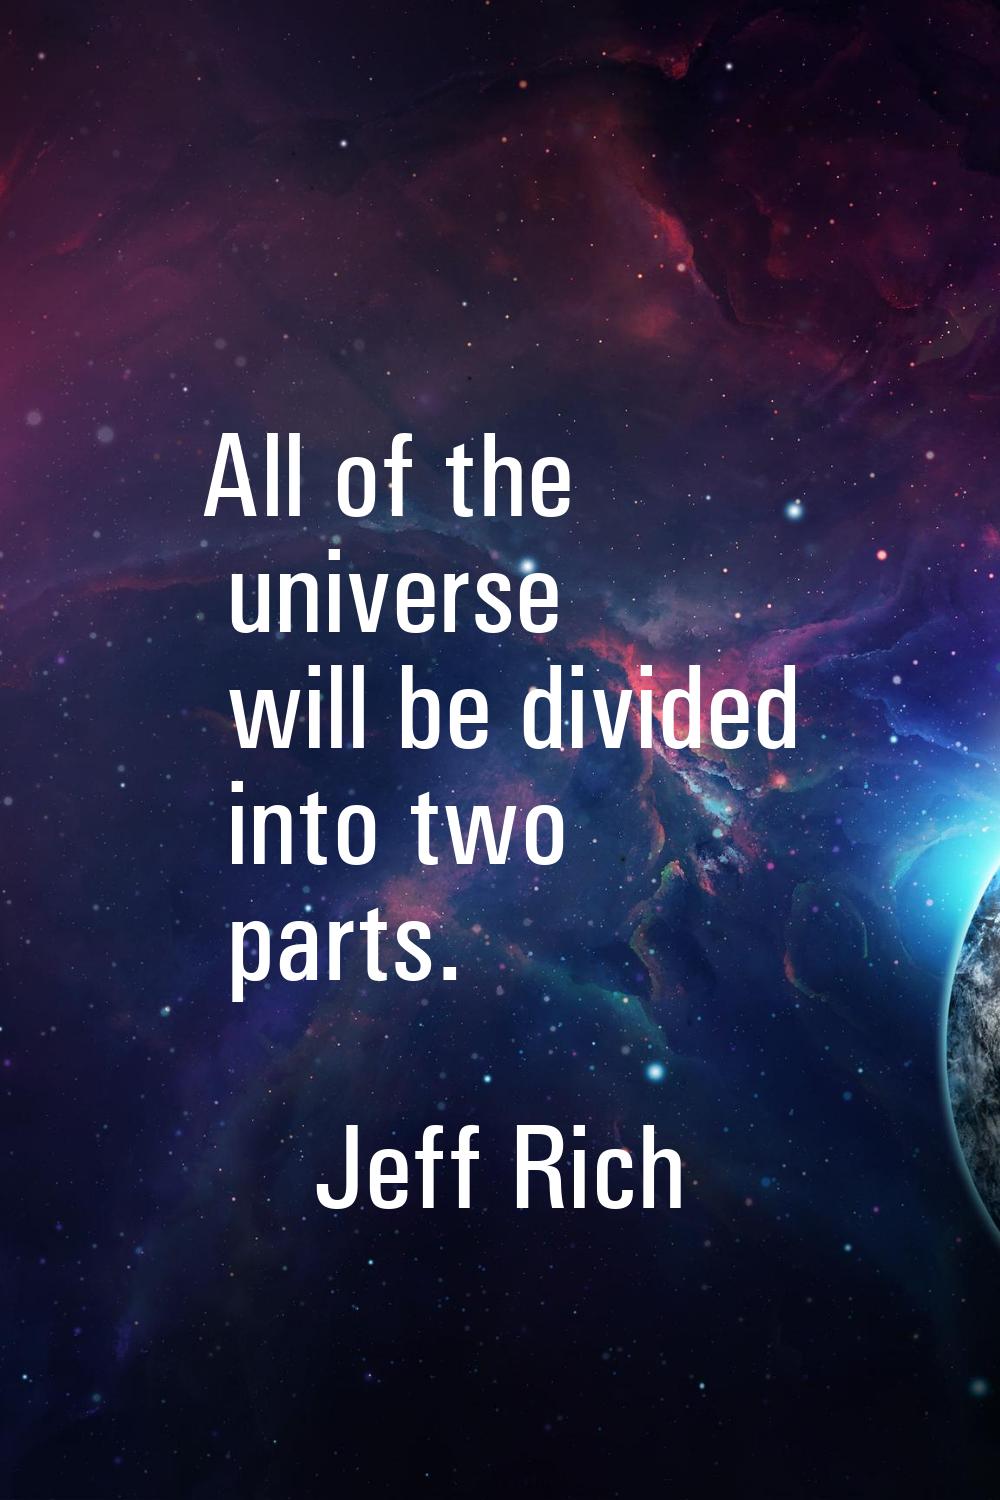 All of the universe will be divided into two parts.